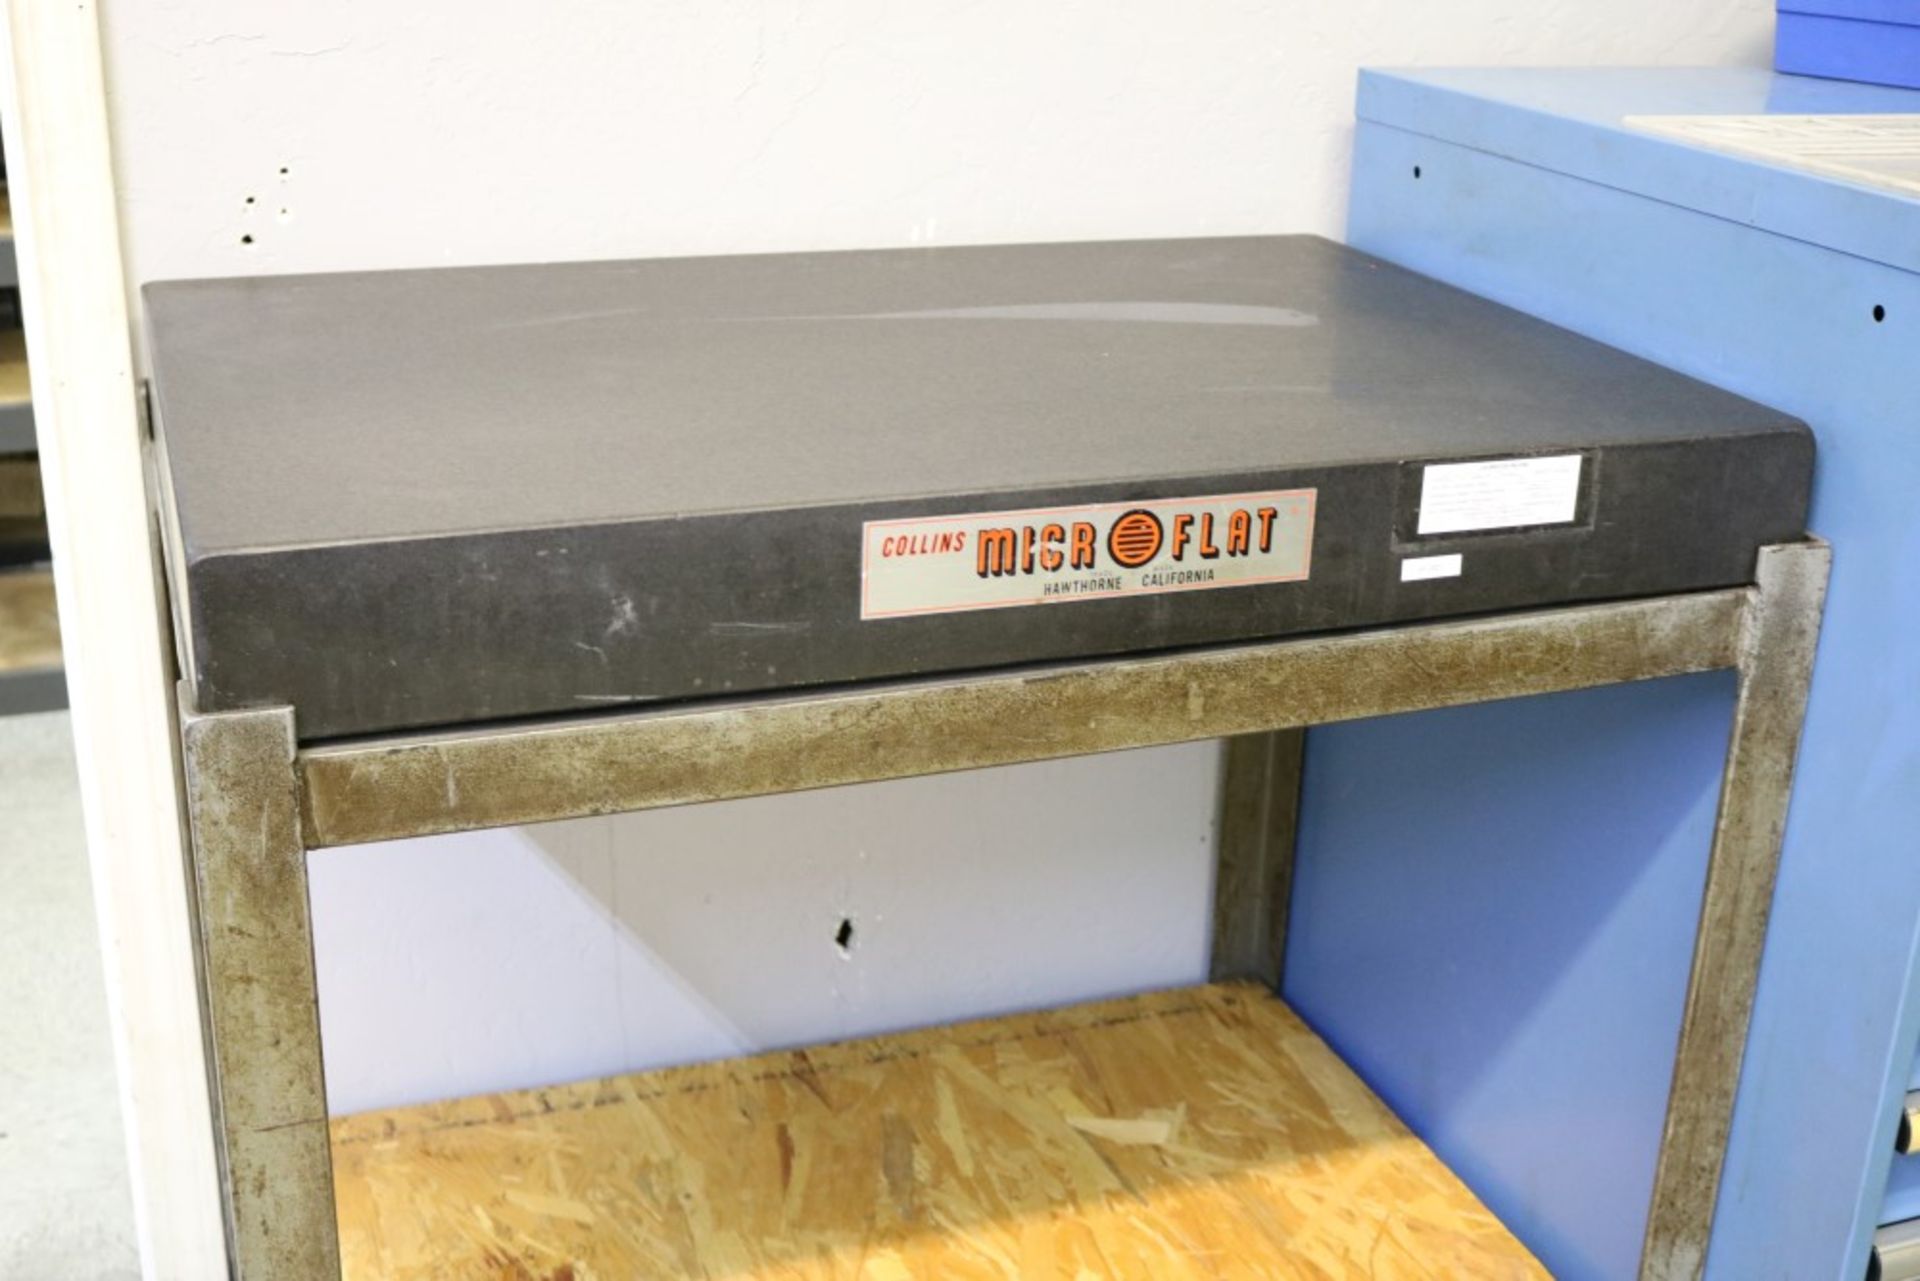 Collins Micro Flat Granite Inspection Table on Stand 24"x36" Grade B - Image 2 of 13